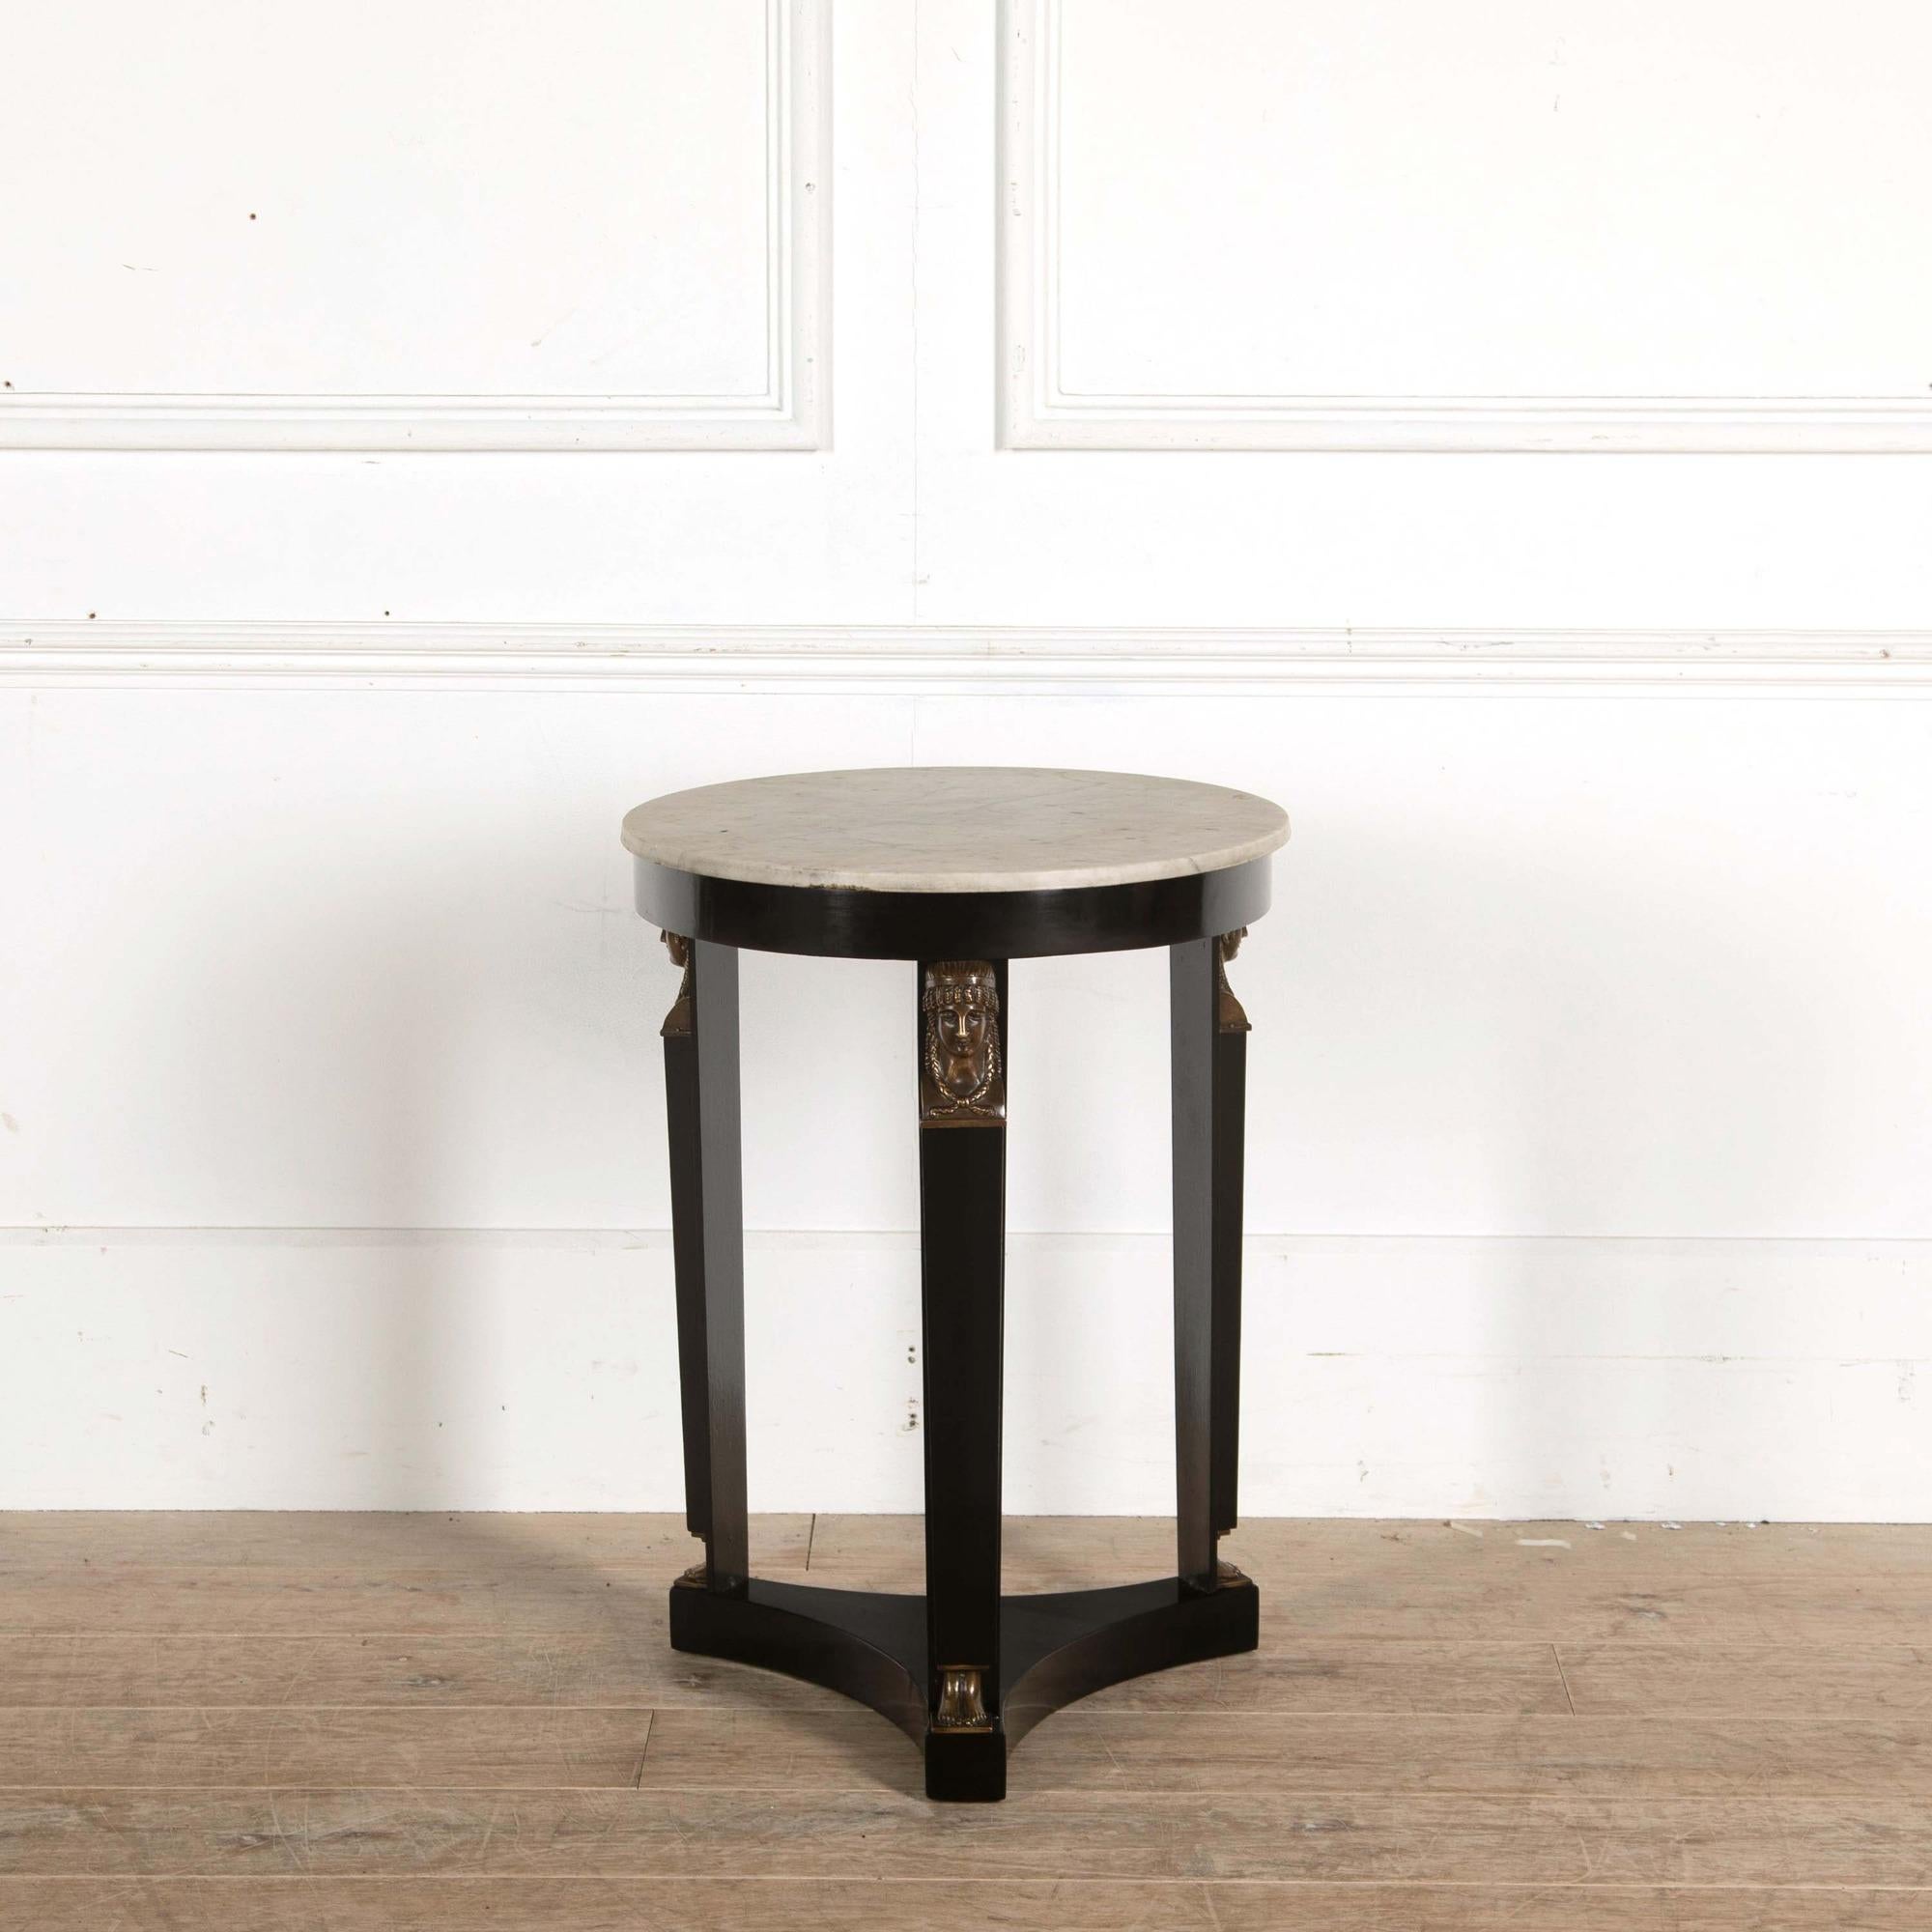 A French ebonized and bronze mounted Directoire marble-top table.